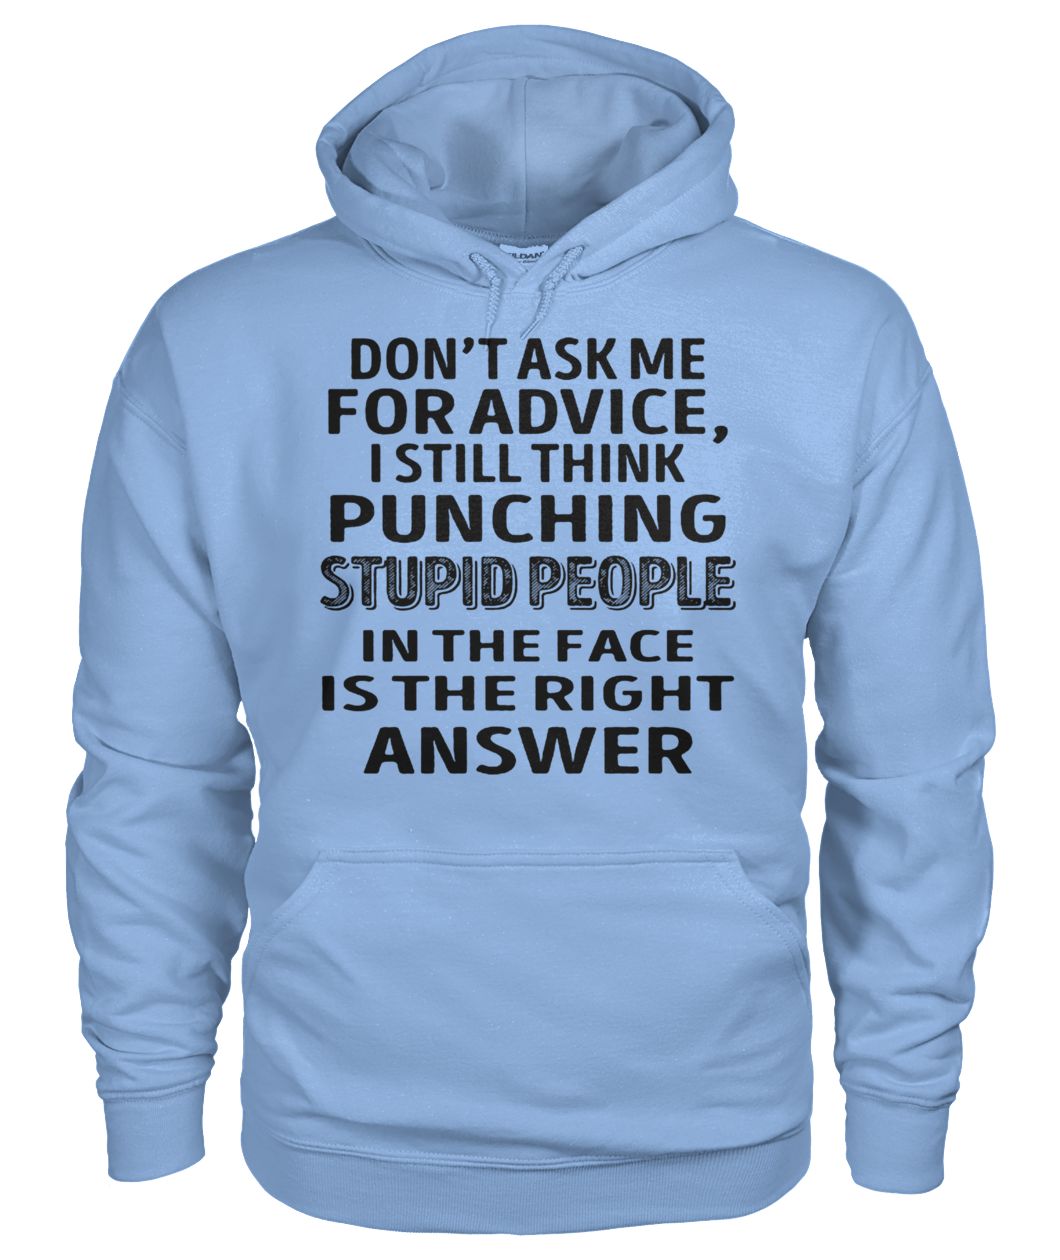 Don't ask me for advice I still think punching stupid people in the face is the right answer gildan hoodie